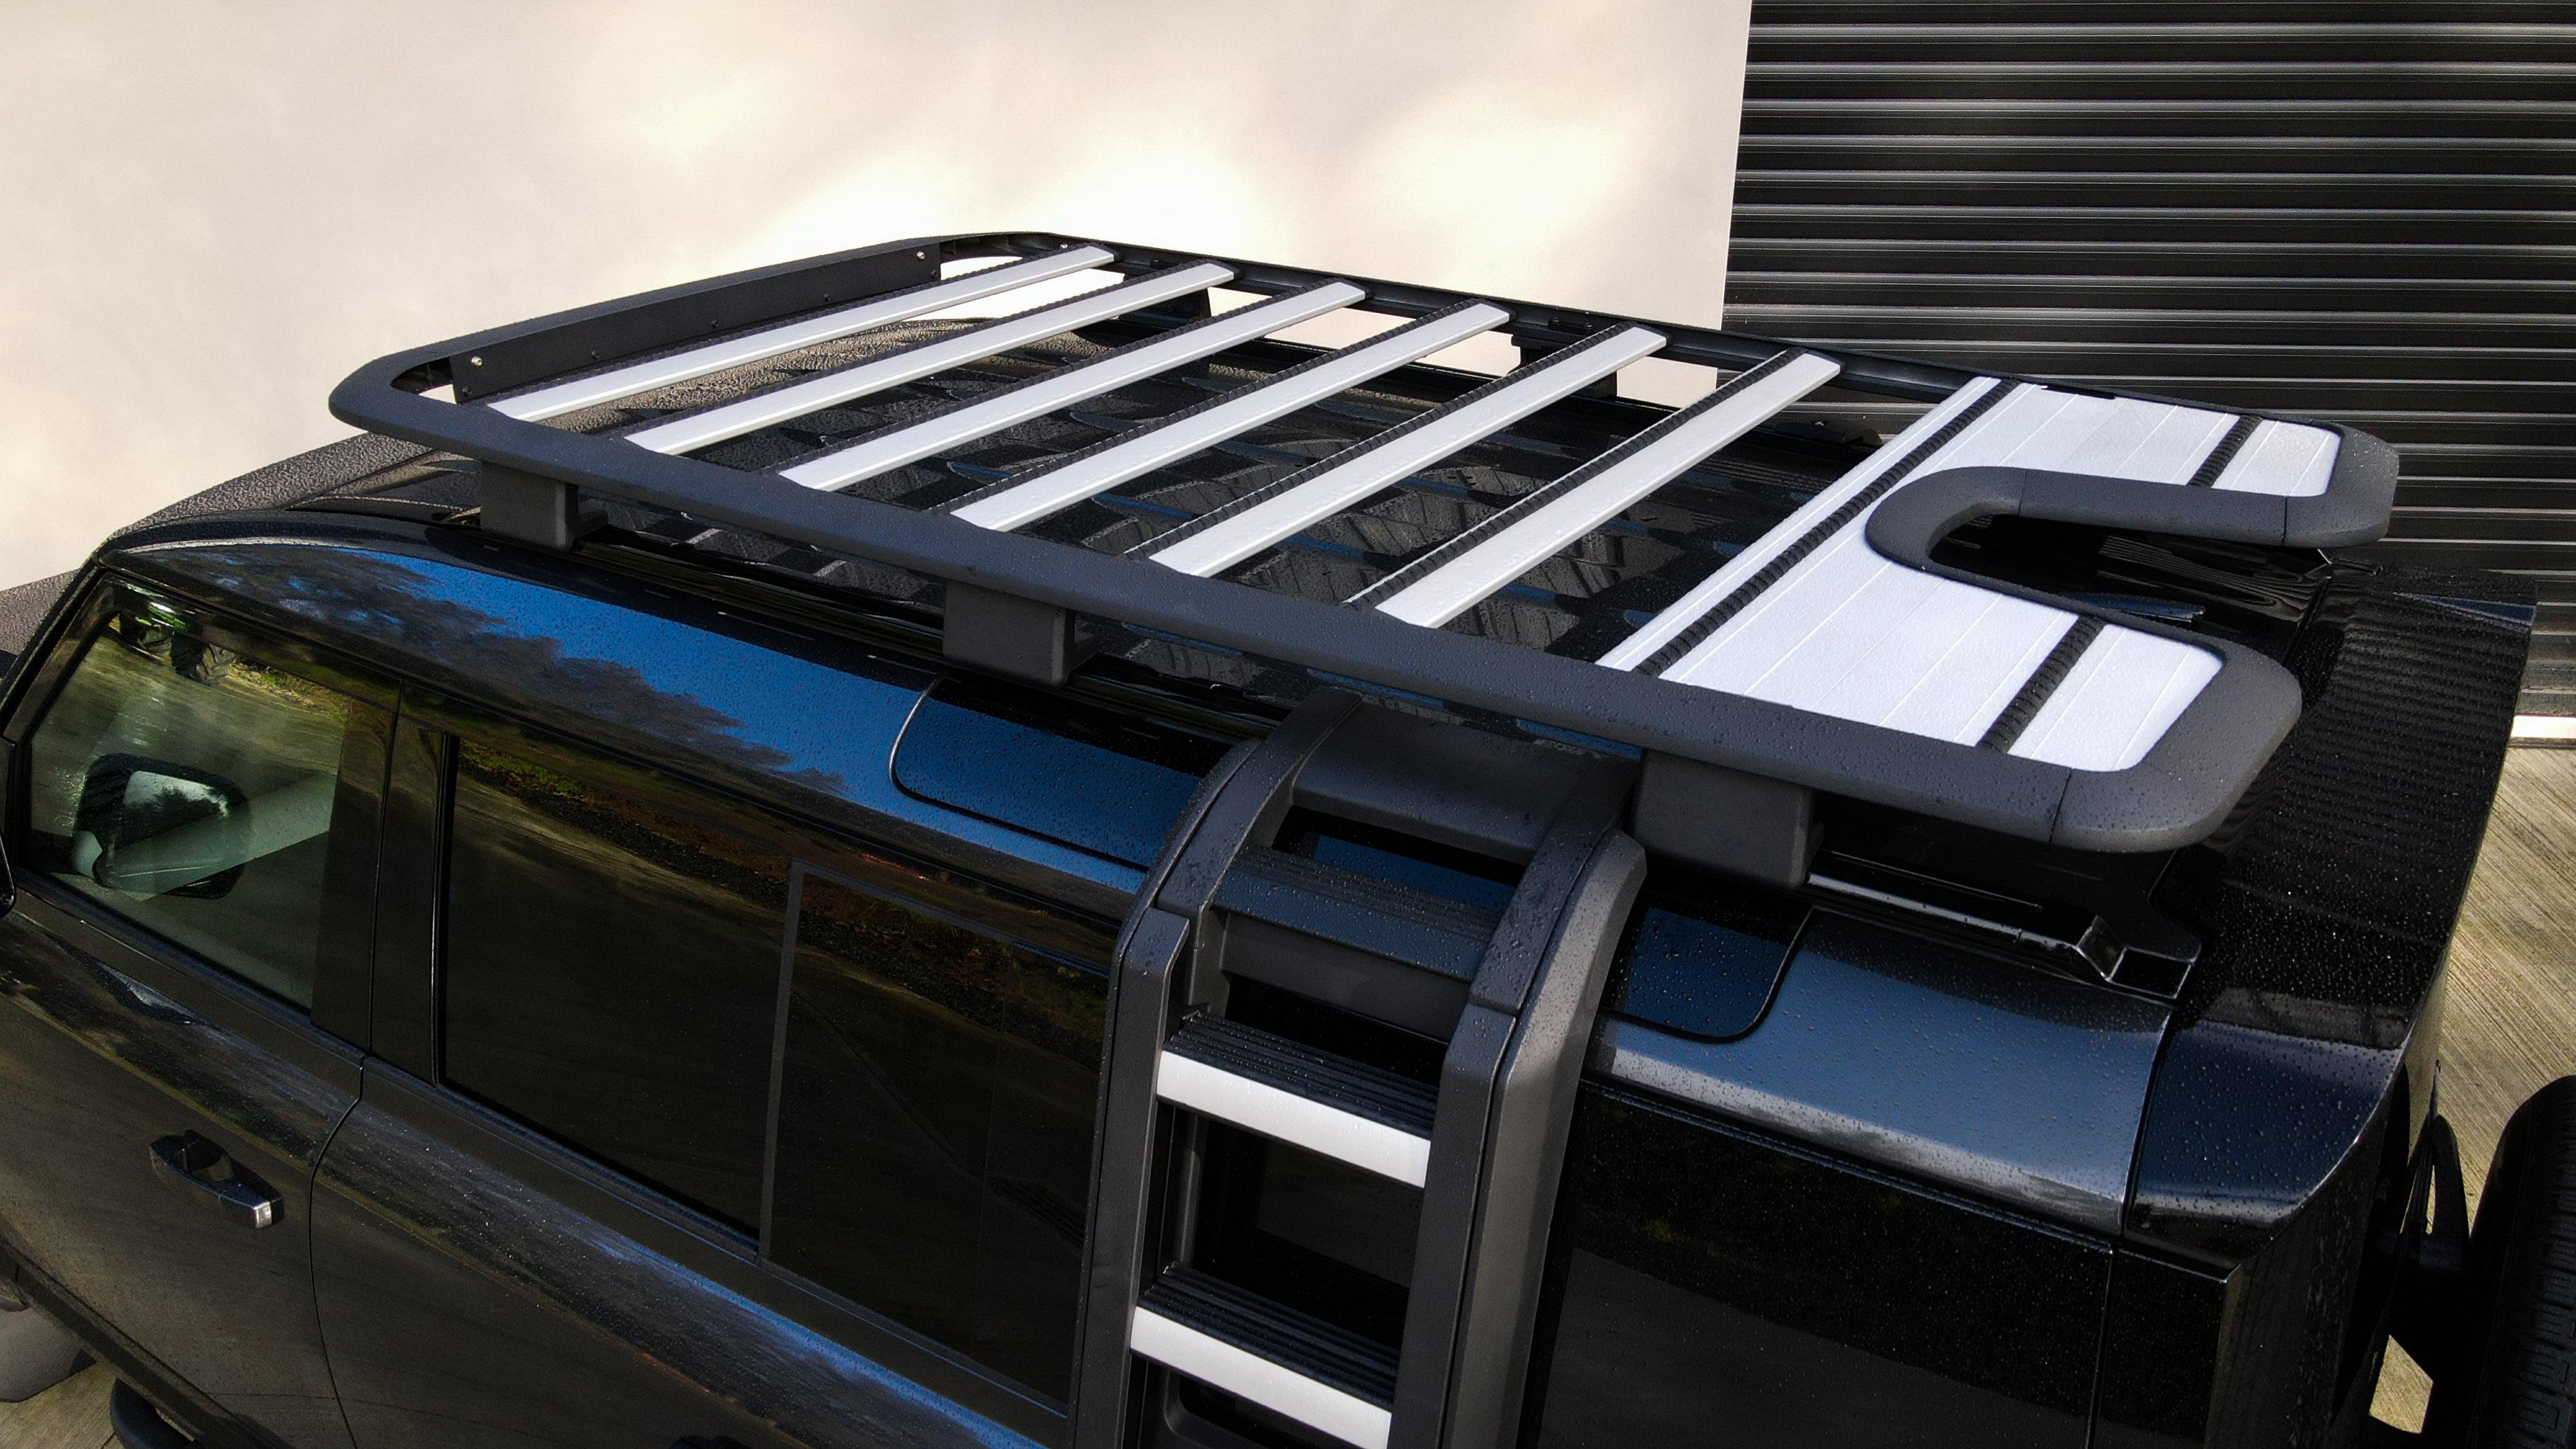 LAND ROVER DEFENDER 110 L663 2020 ON OE STYLE ROOF RACK - RisperStyling